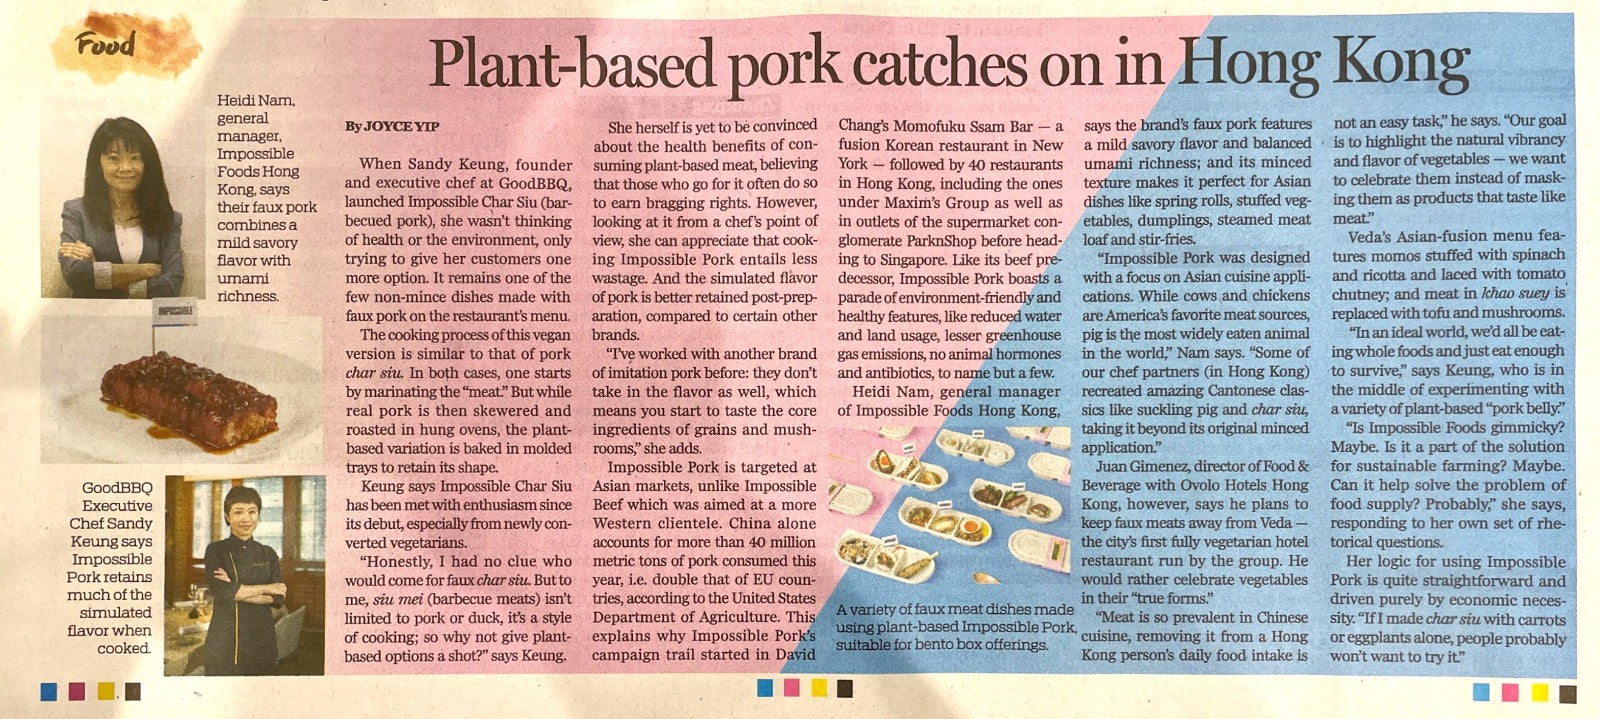 Plant-based pork catches on in Hong Kong